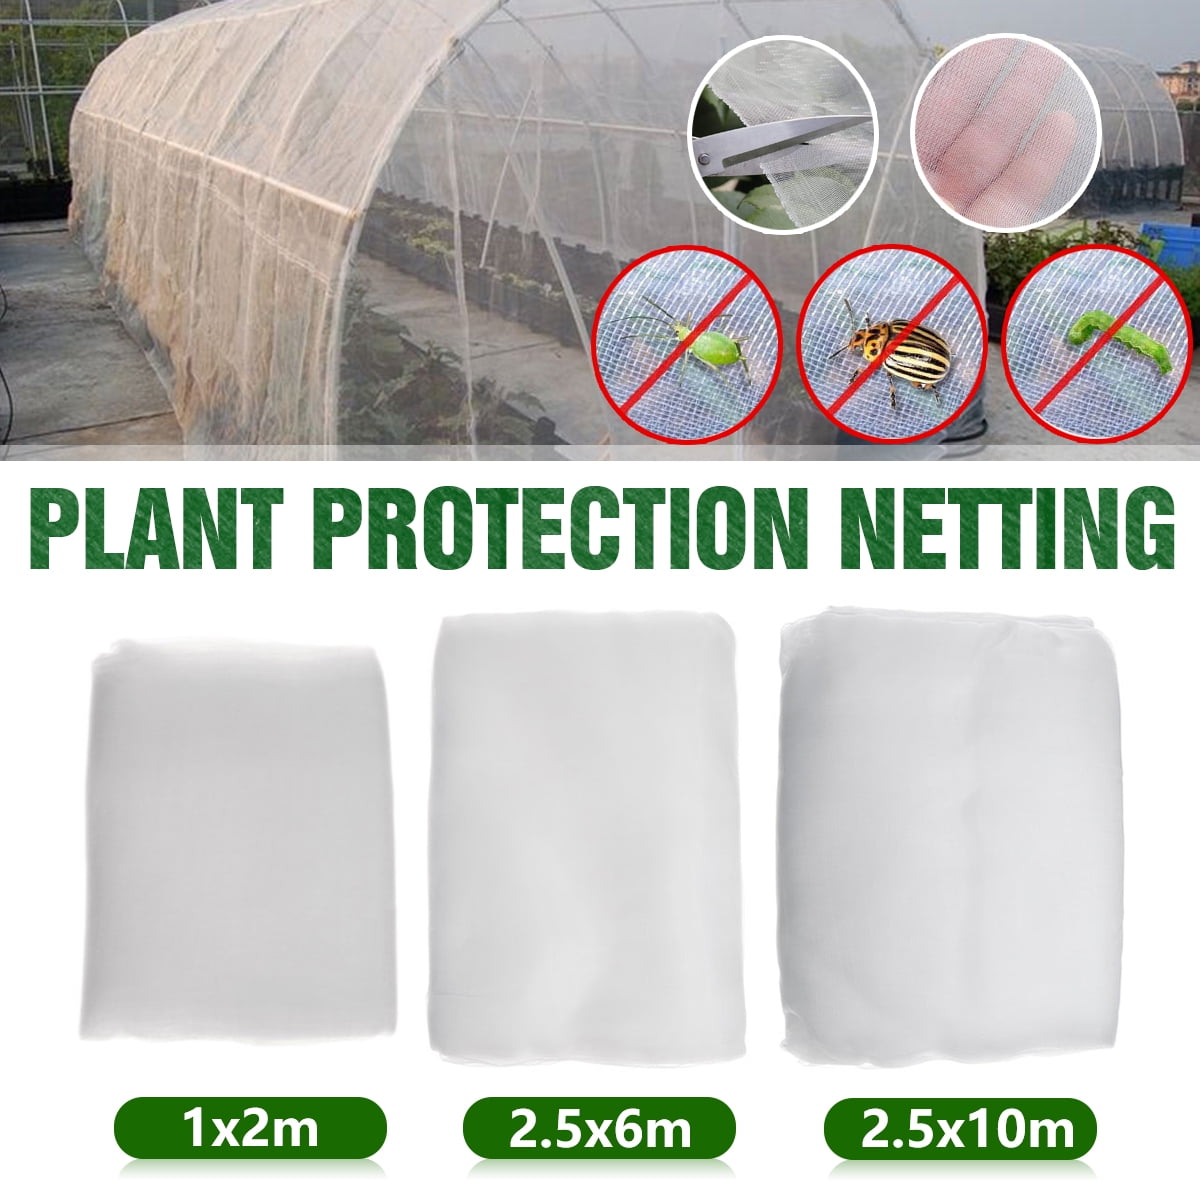 40 Meshes Anti Insect Bird Nets Farm Vegetable Pest Control Screen Garden Plants 